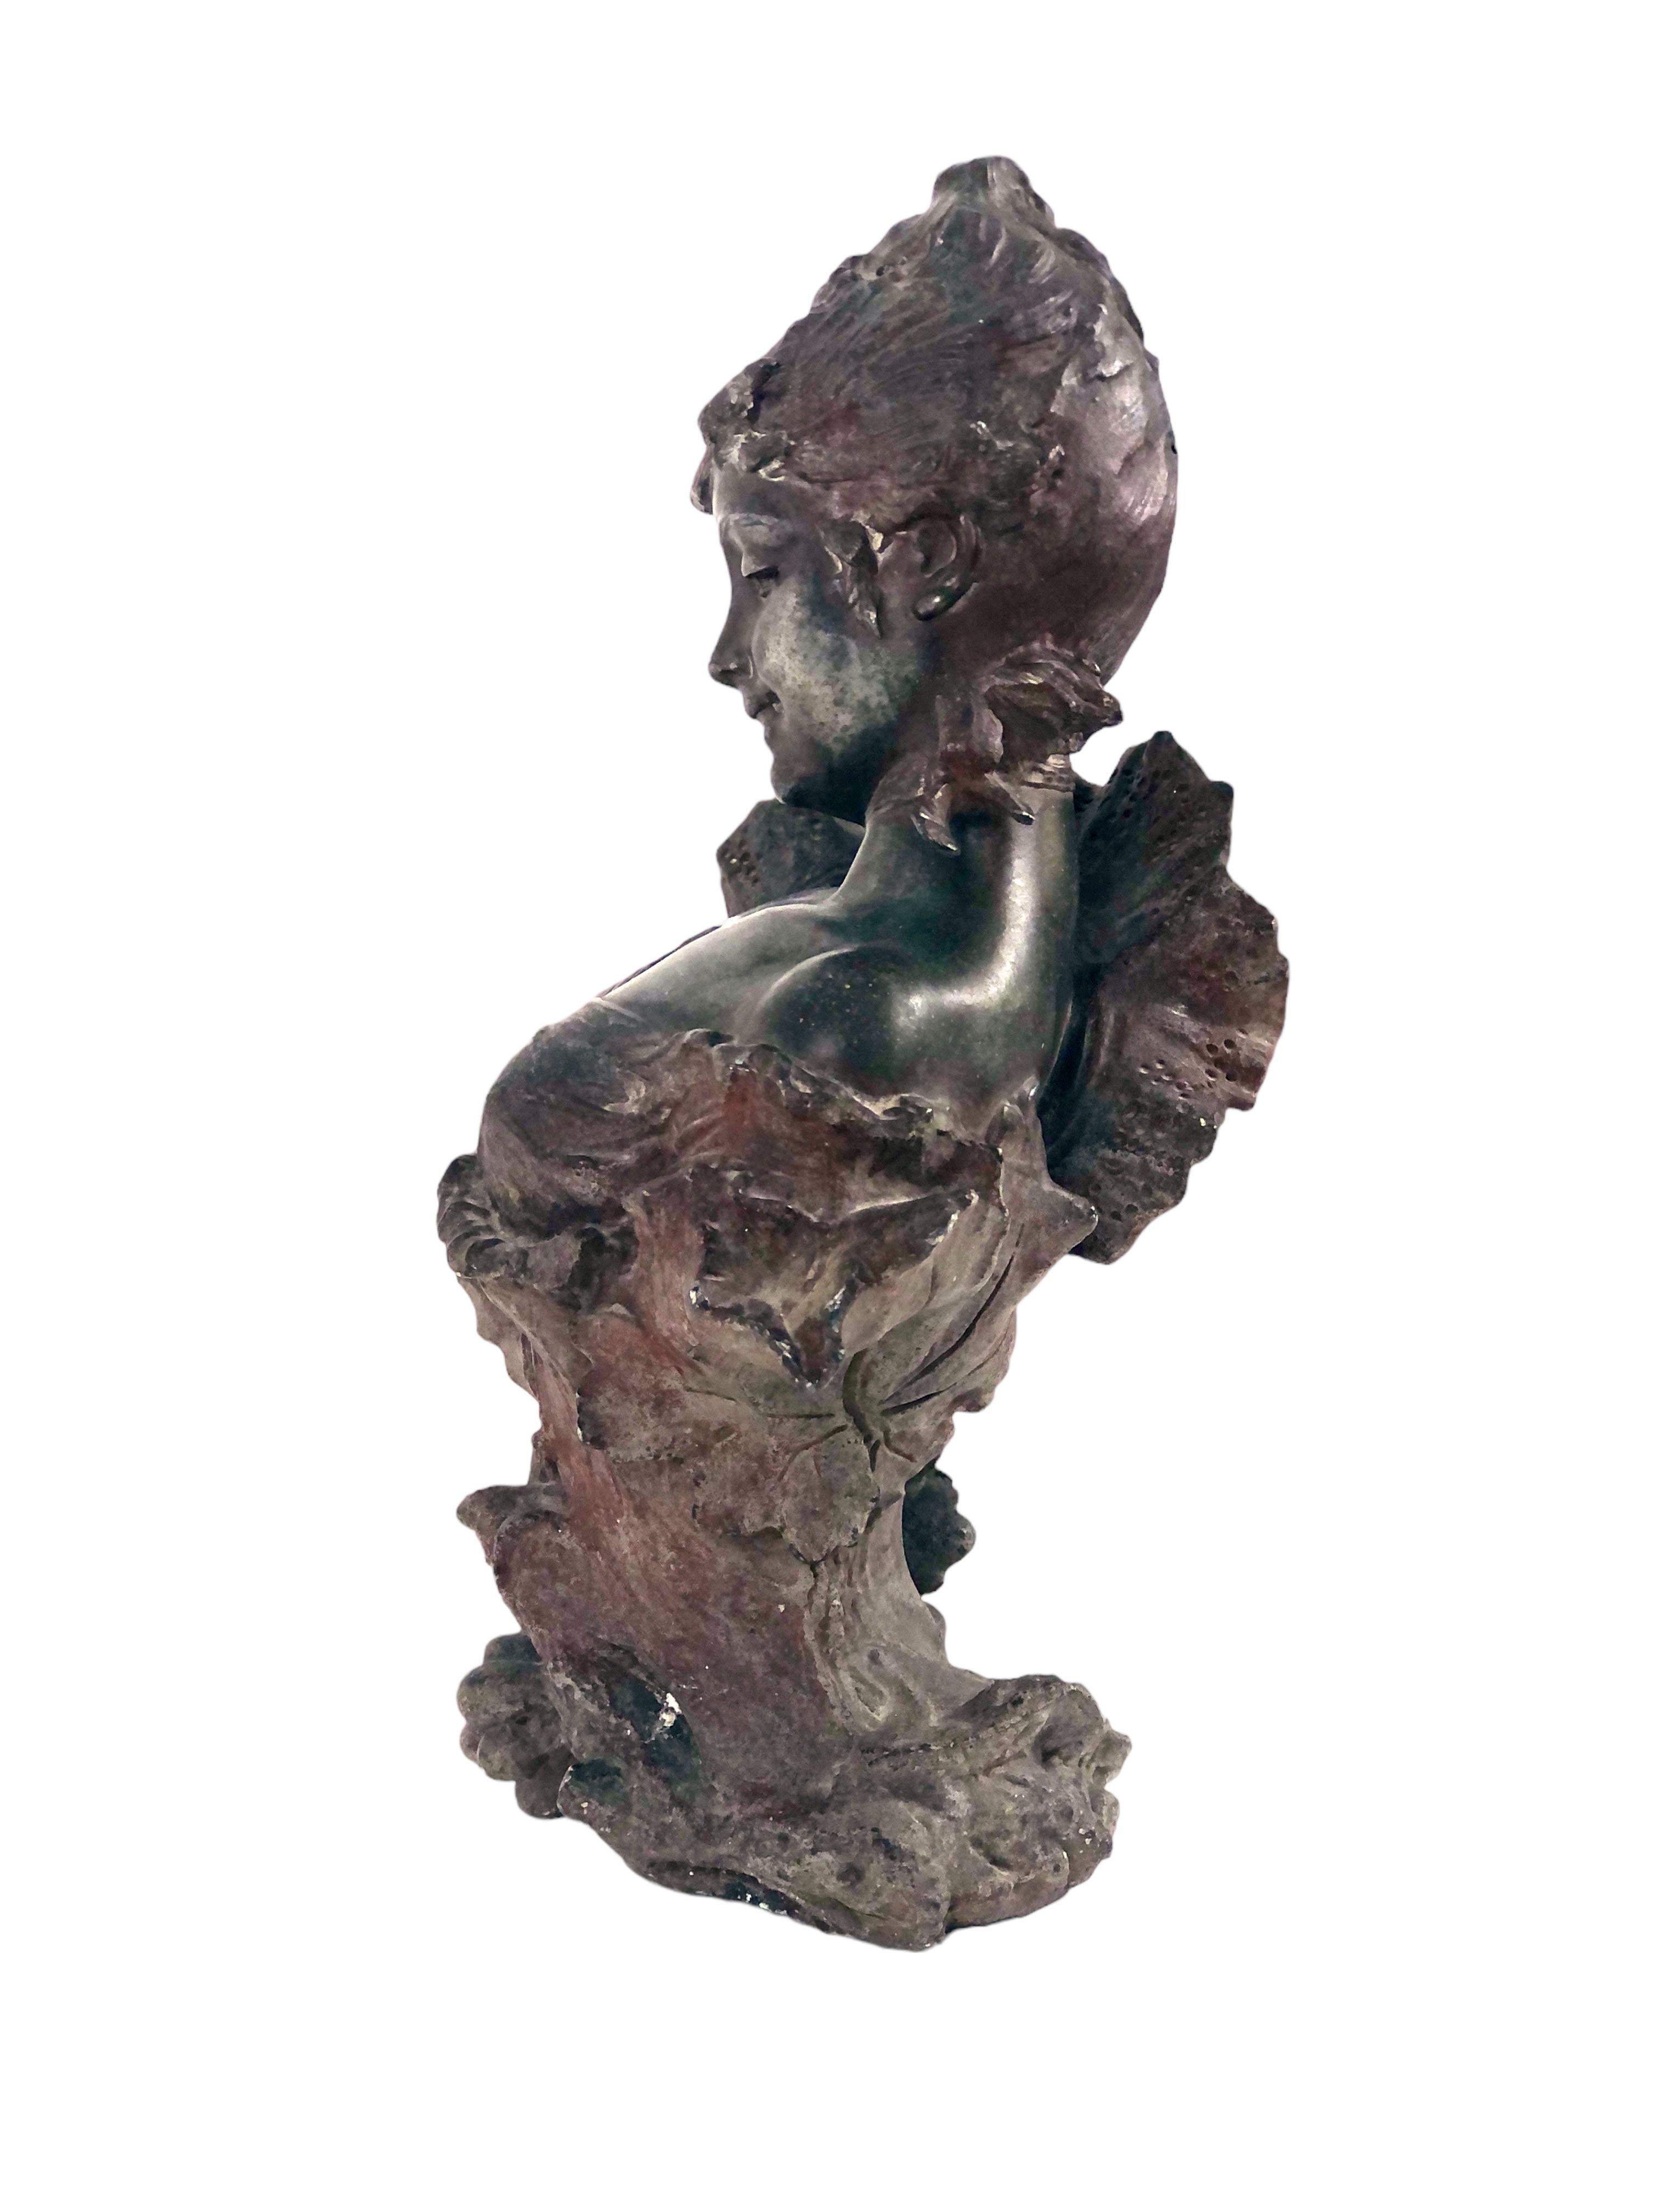 Aluminum French Art Nouveau Woman Bust “Fraises au Champagne” by Alfred Jean Foretay For Sale